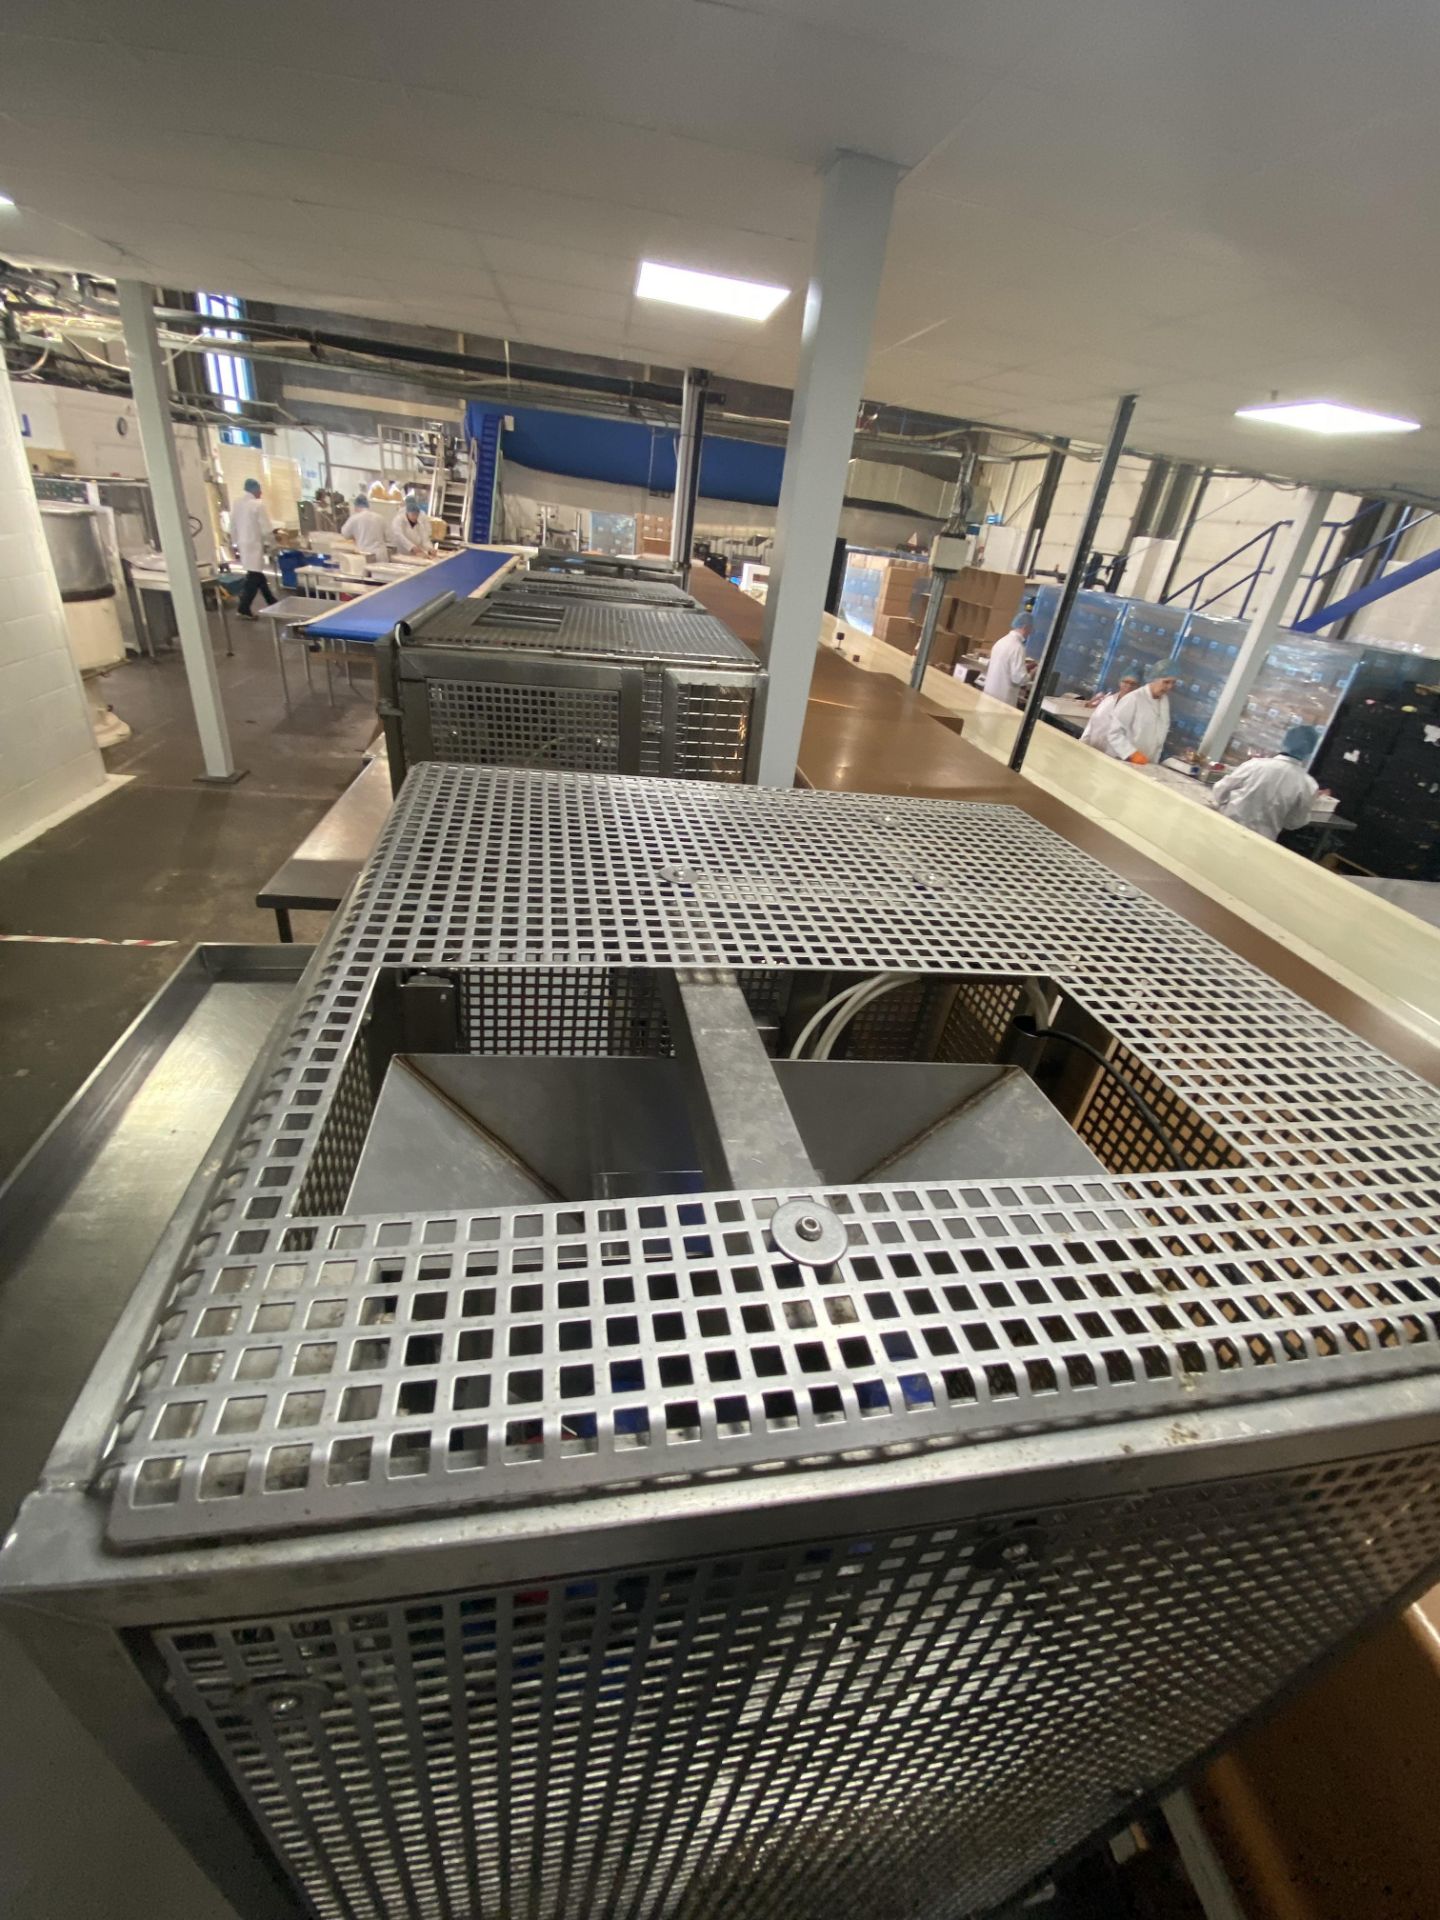 STAINLESS STEEL APPLE SPIKING MACHINE, approx. 1m x 650mm x 1.8m high overall, 240V, with fitted - Image 5 of 5